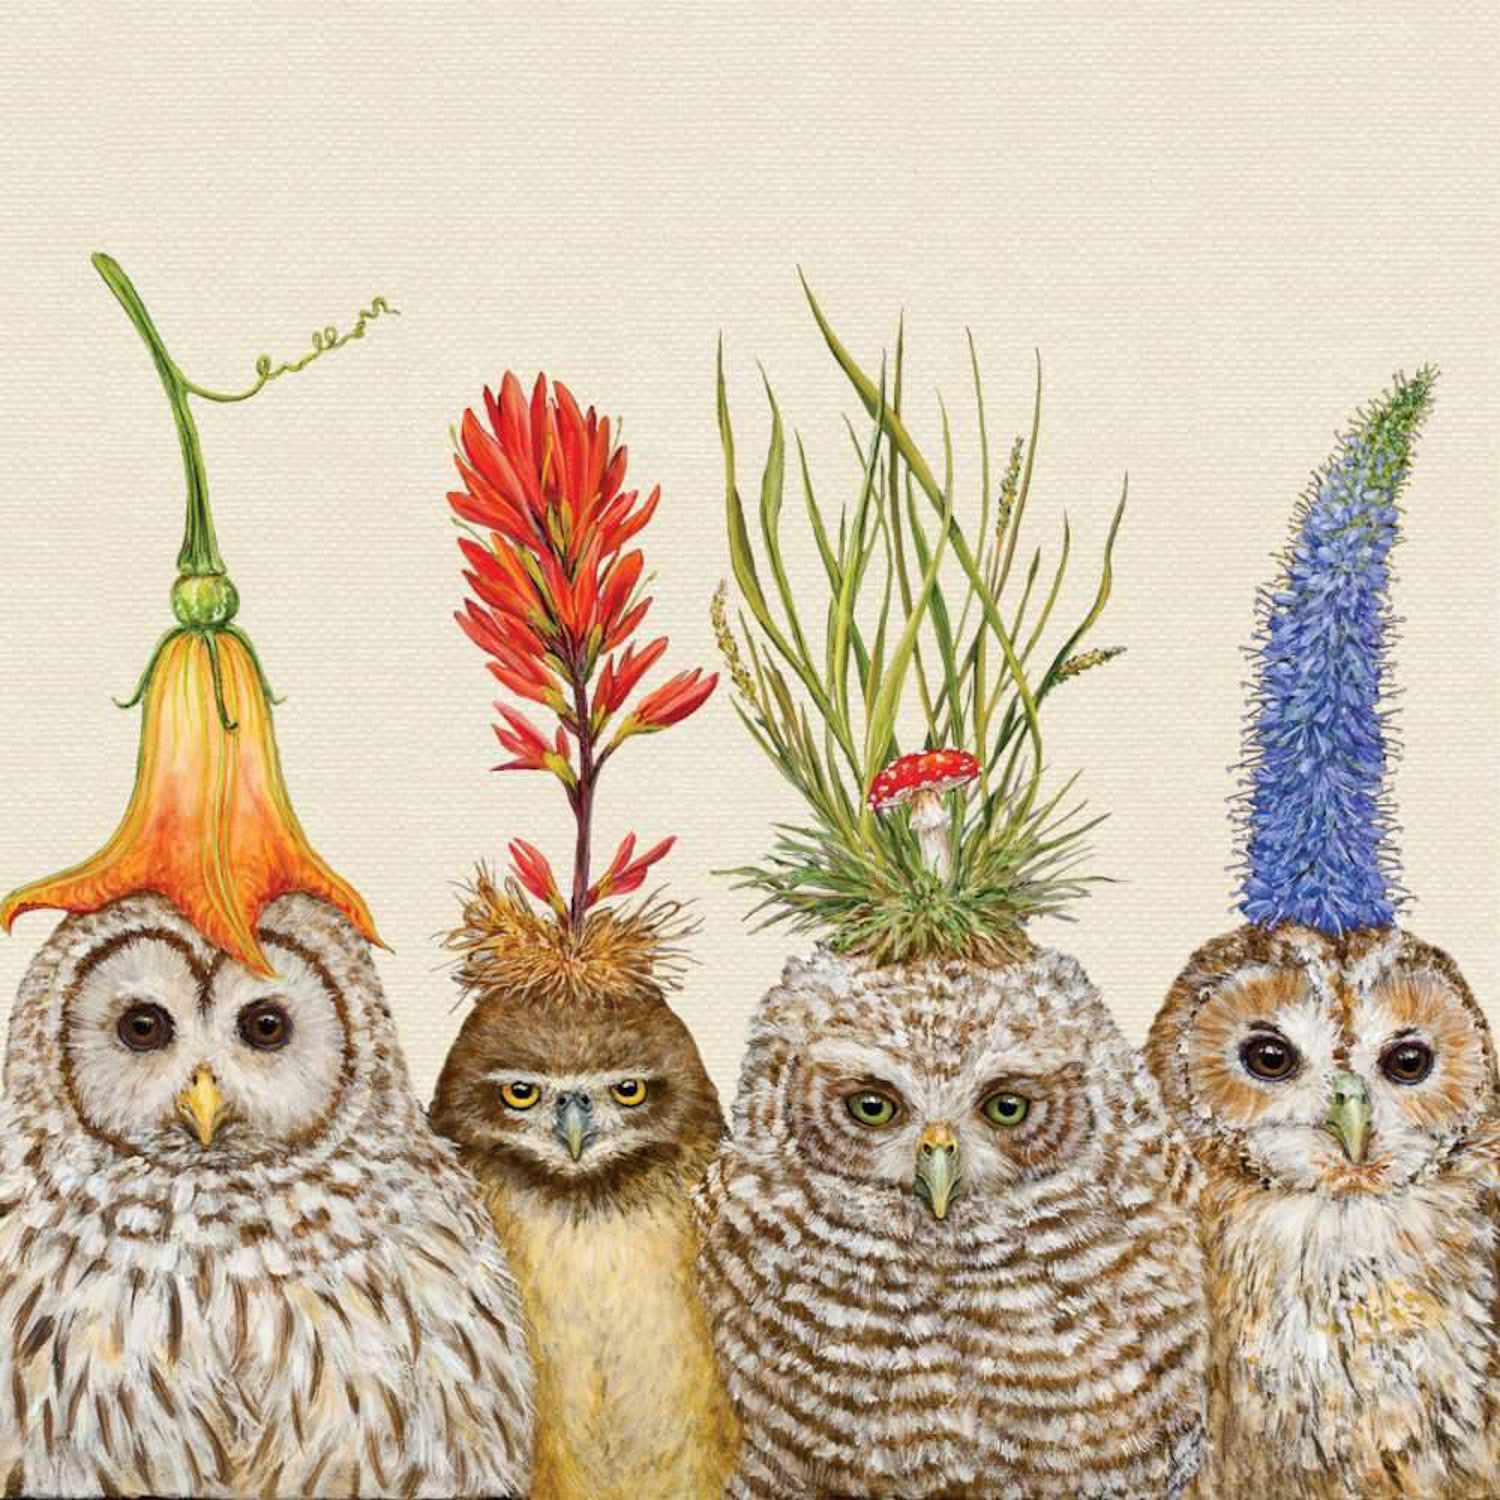 Four owls in a row with different types of plants growing on their heads, depicted on Paper Products Design Big Hat Night Lunch Napkins.